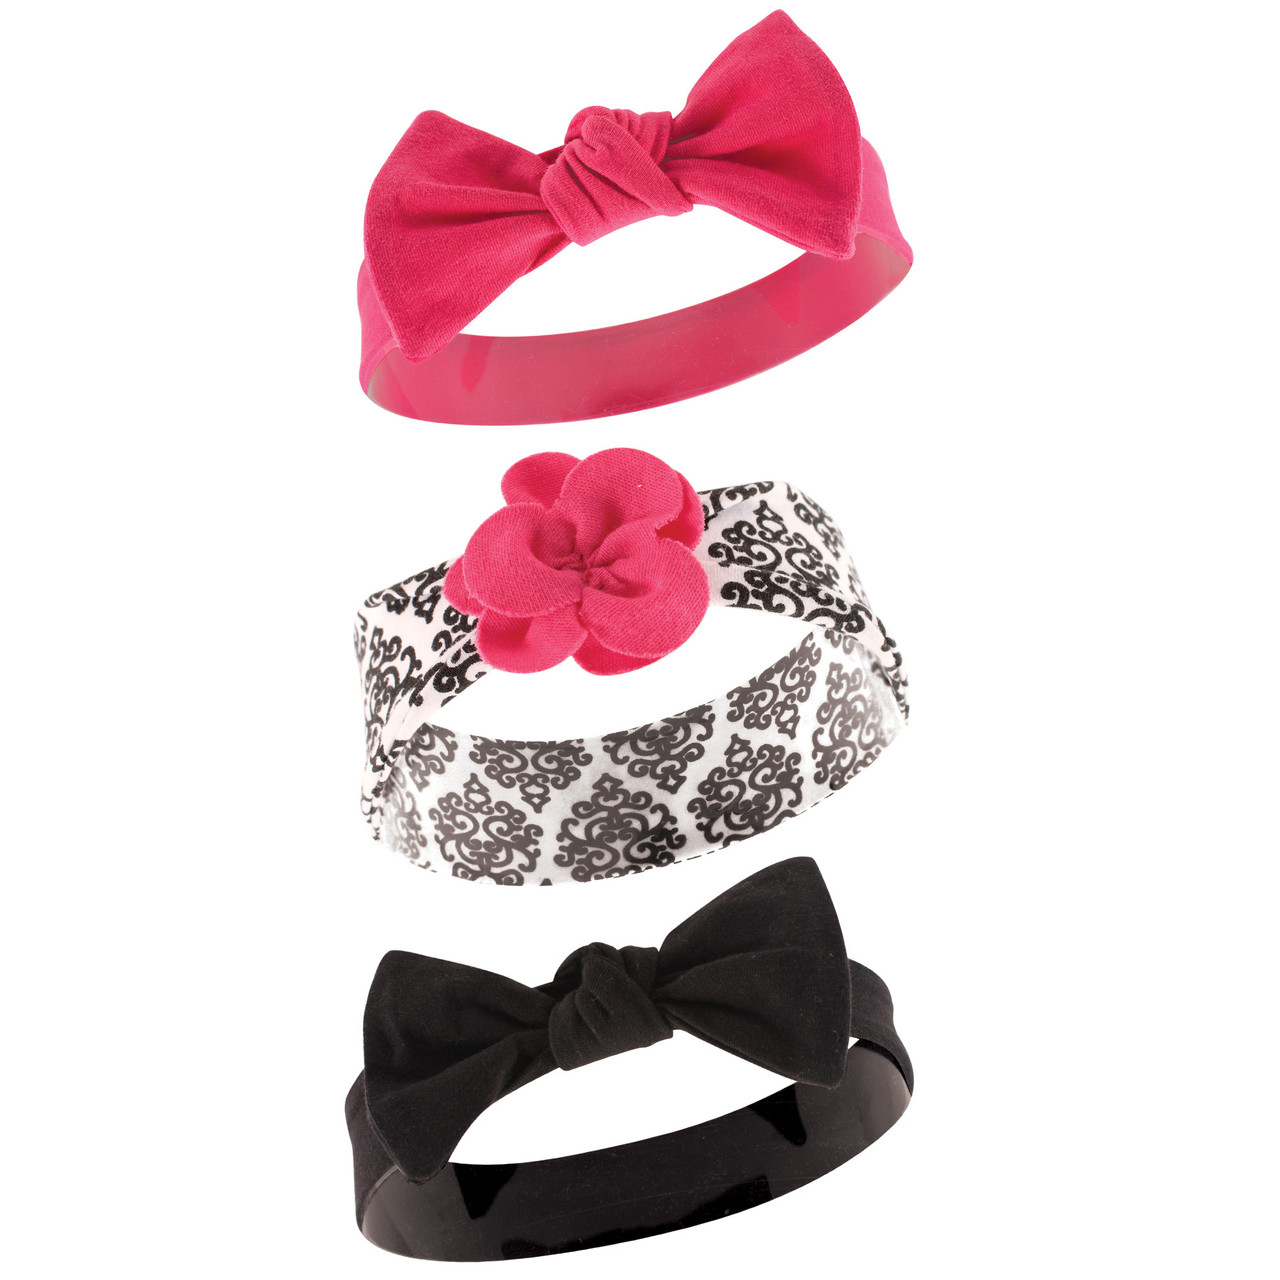 Yoga Sprout Headbands, 3-Pack, Black Damask | Baby and Toddler Clothes ...